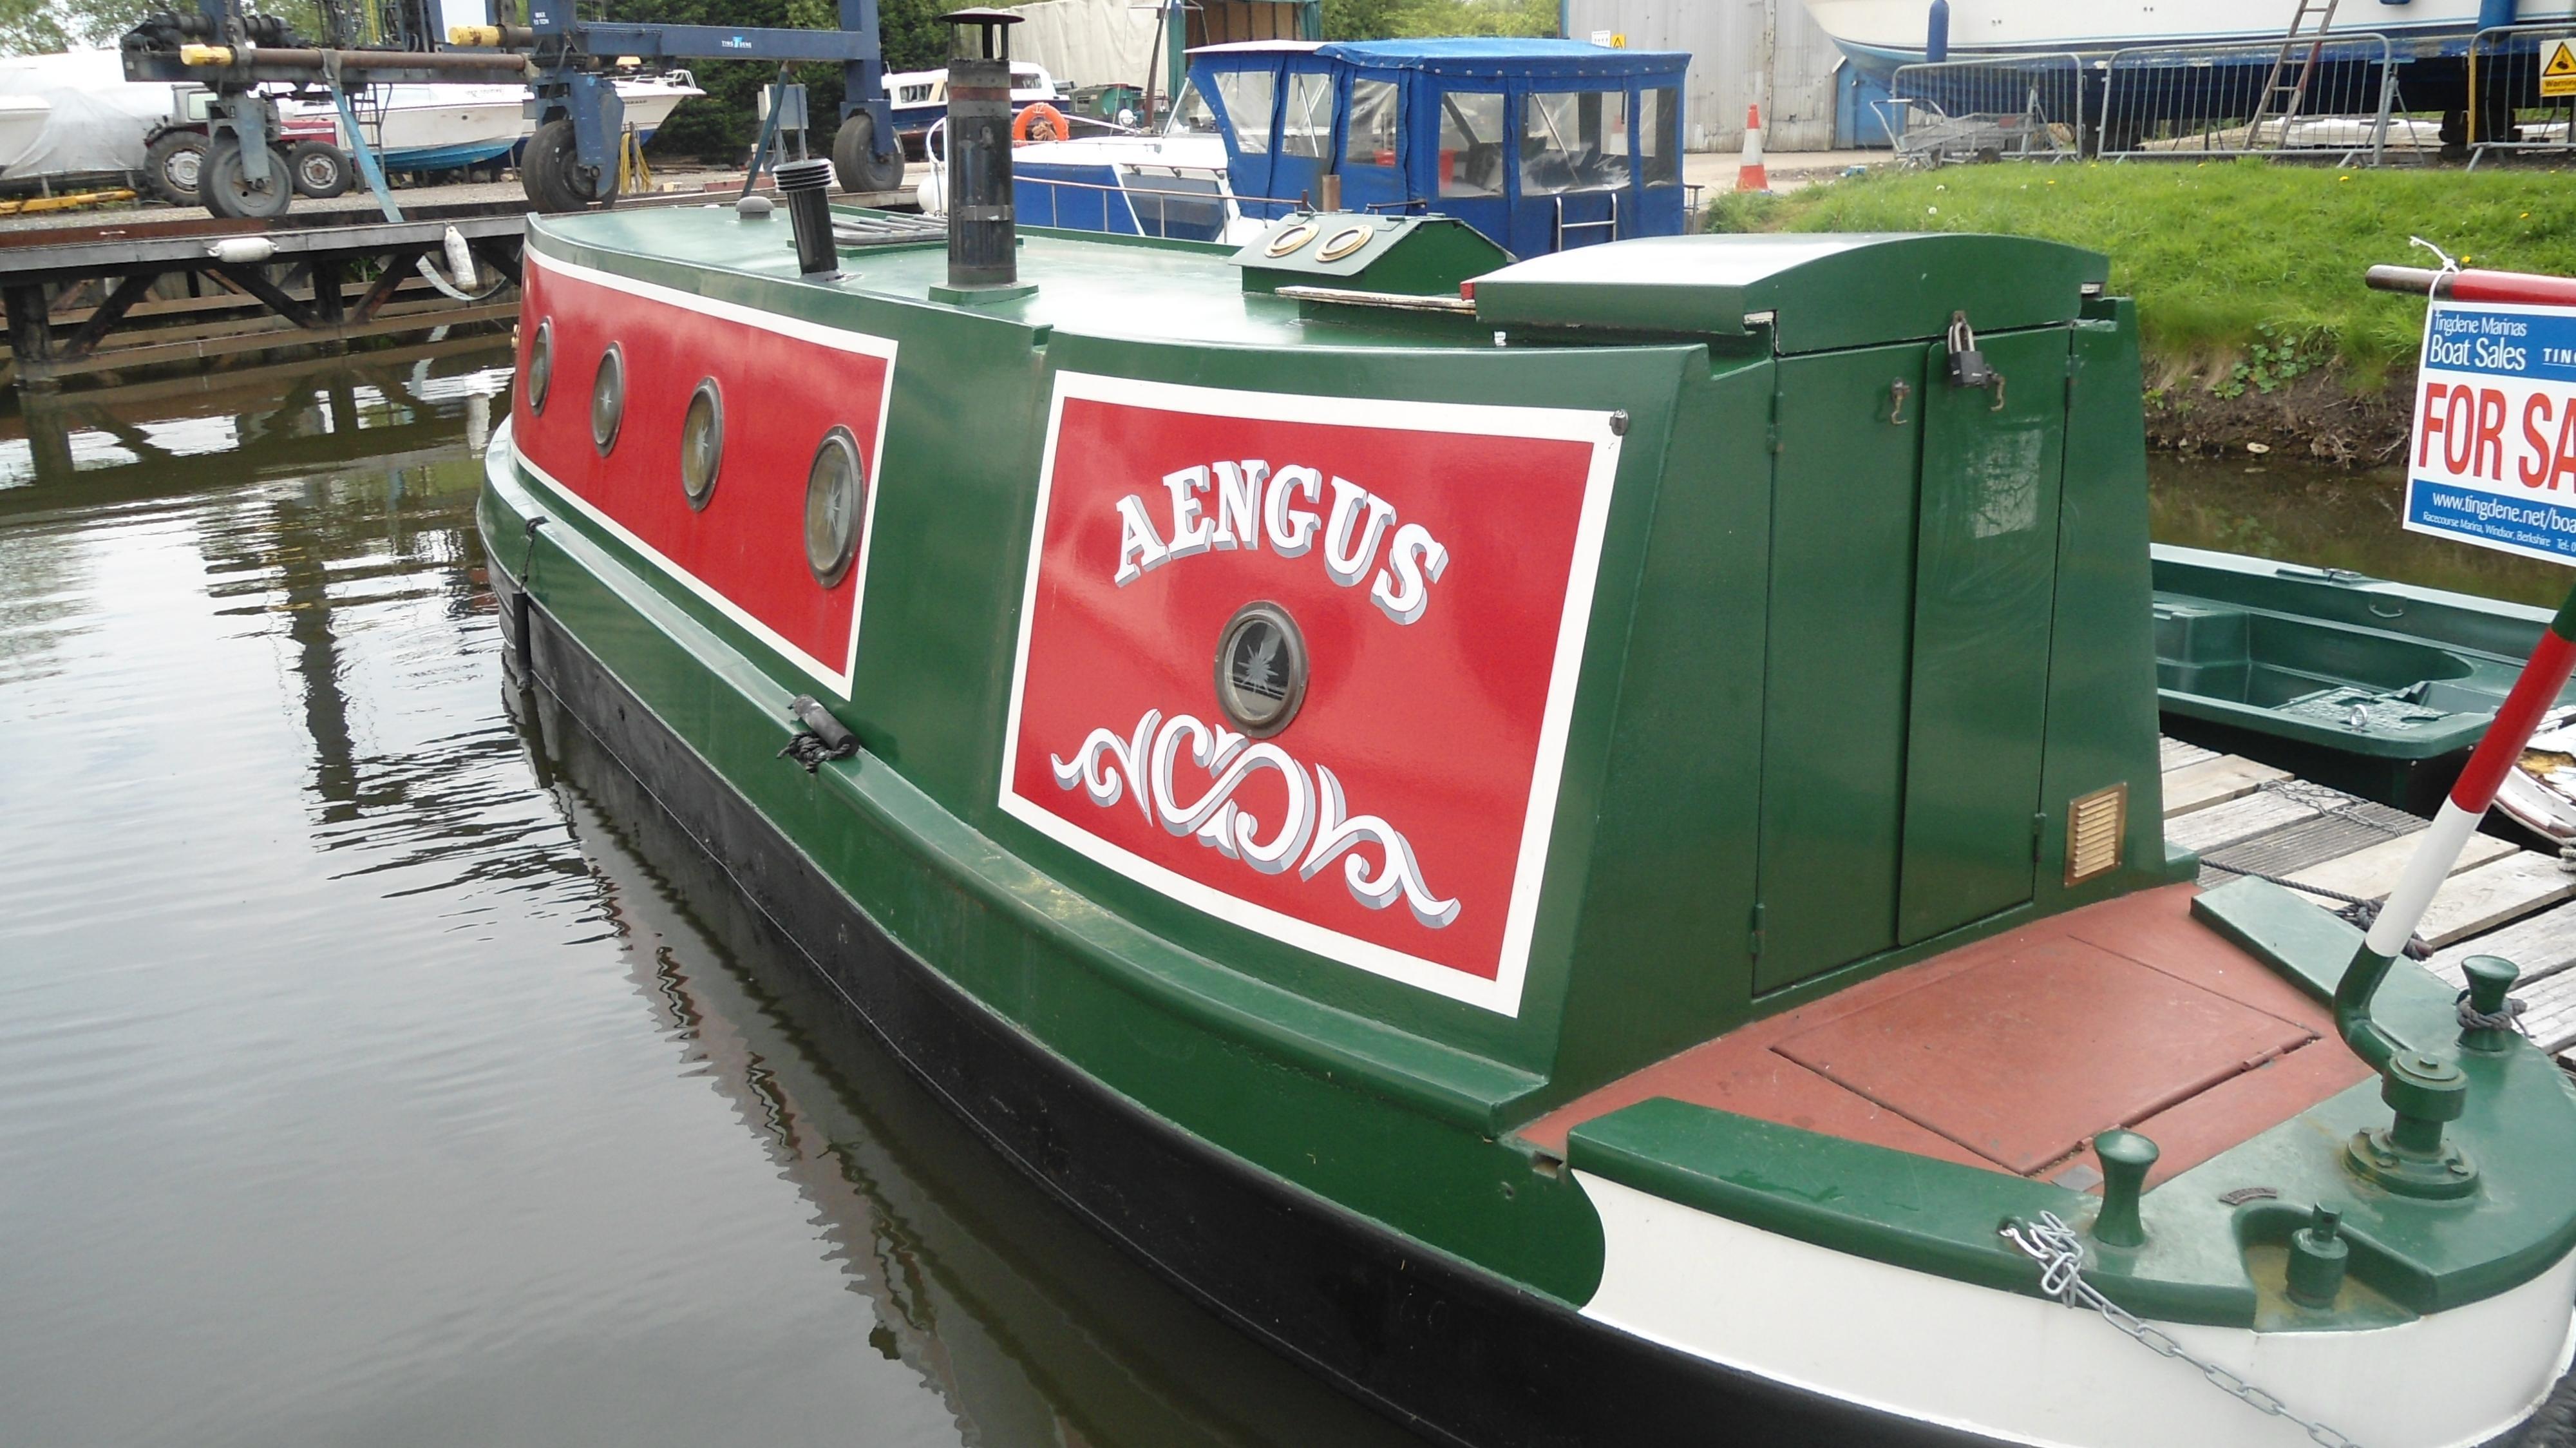 Narrow Boat by Calcutt Boats with Traditional Stern, Pyrford Marina on River Wey, Surrey